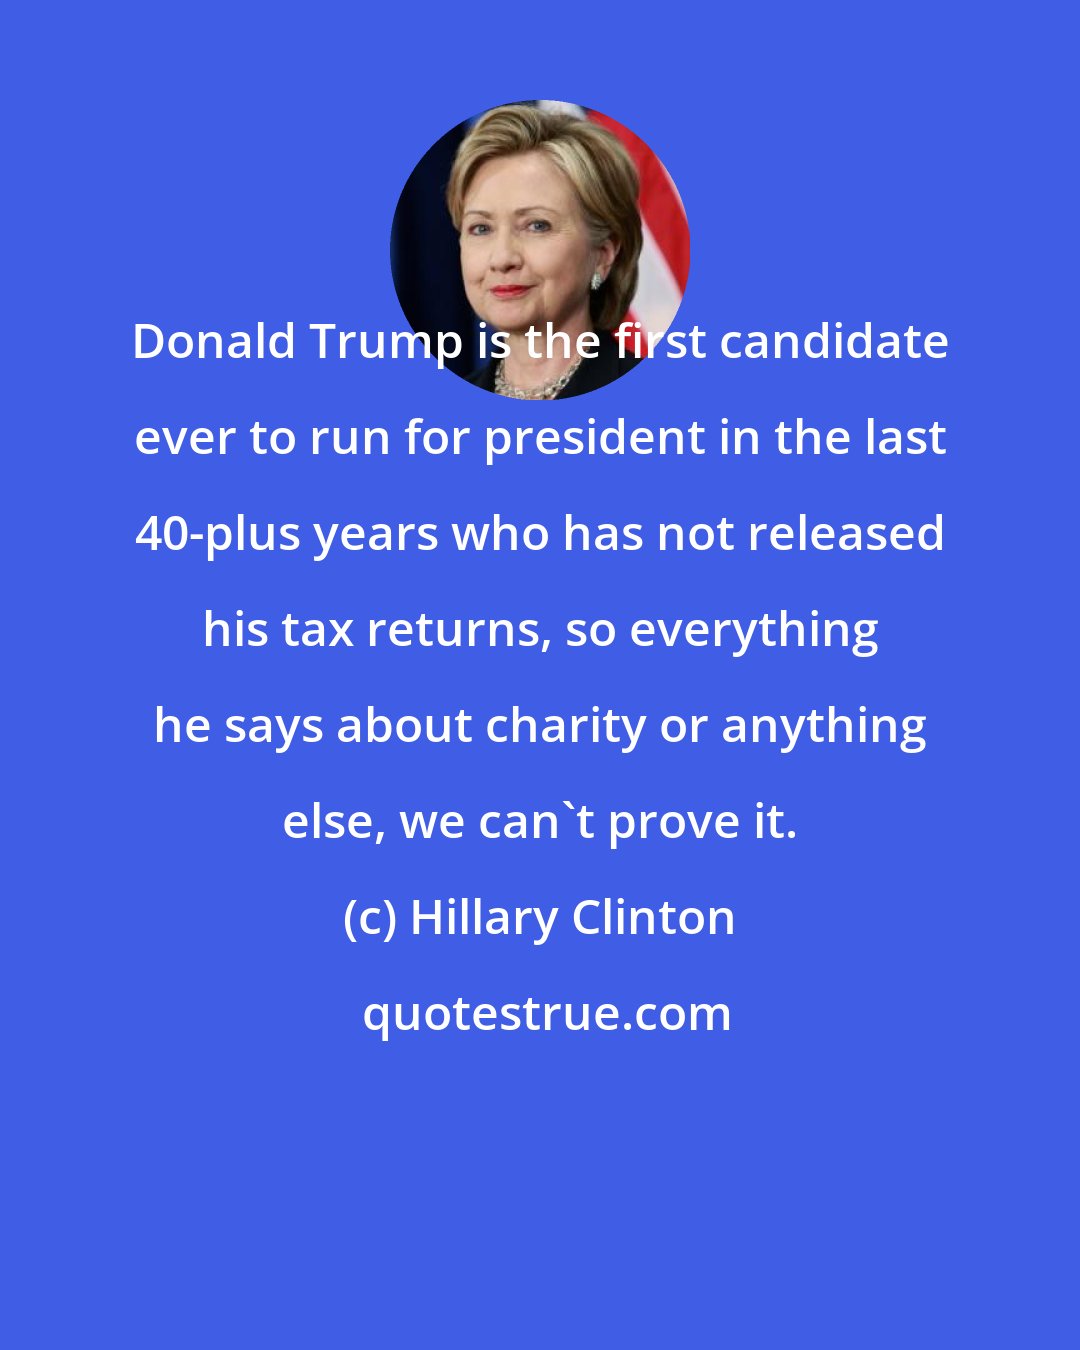 Hillary Clinton: Donald Trump is the first candidate ever to run for president in the last 40-plus years who has not released his tax returns, so everything he says about charity or anything else, we can't prove it.